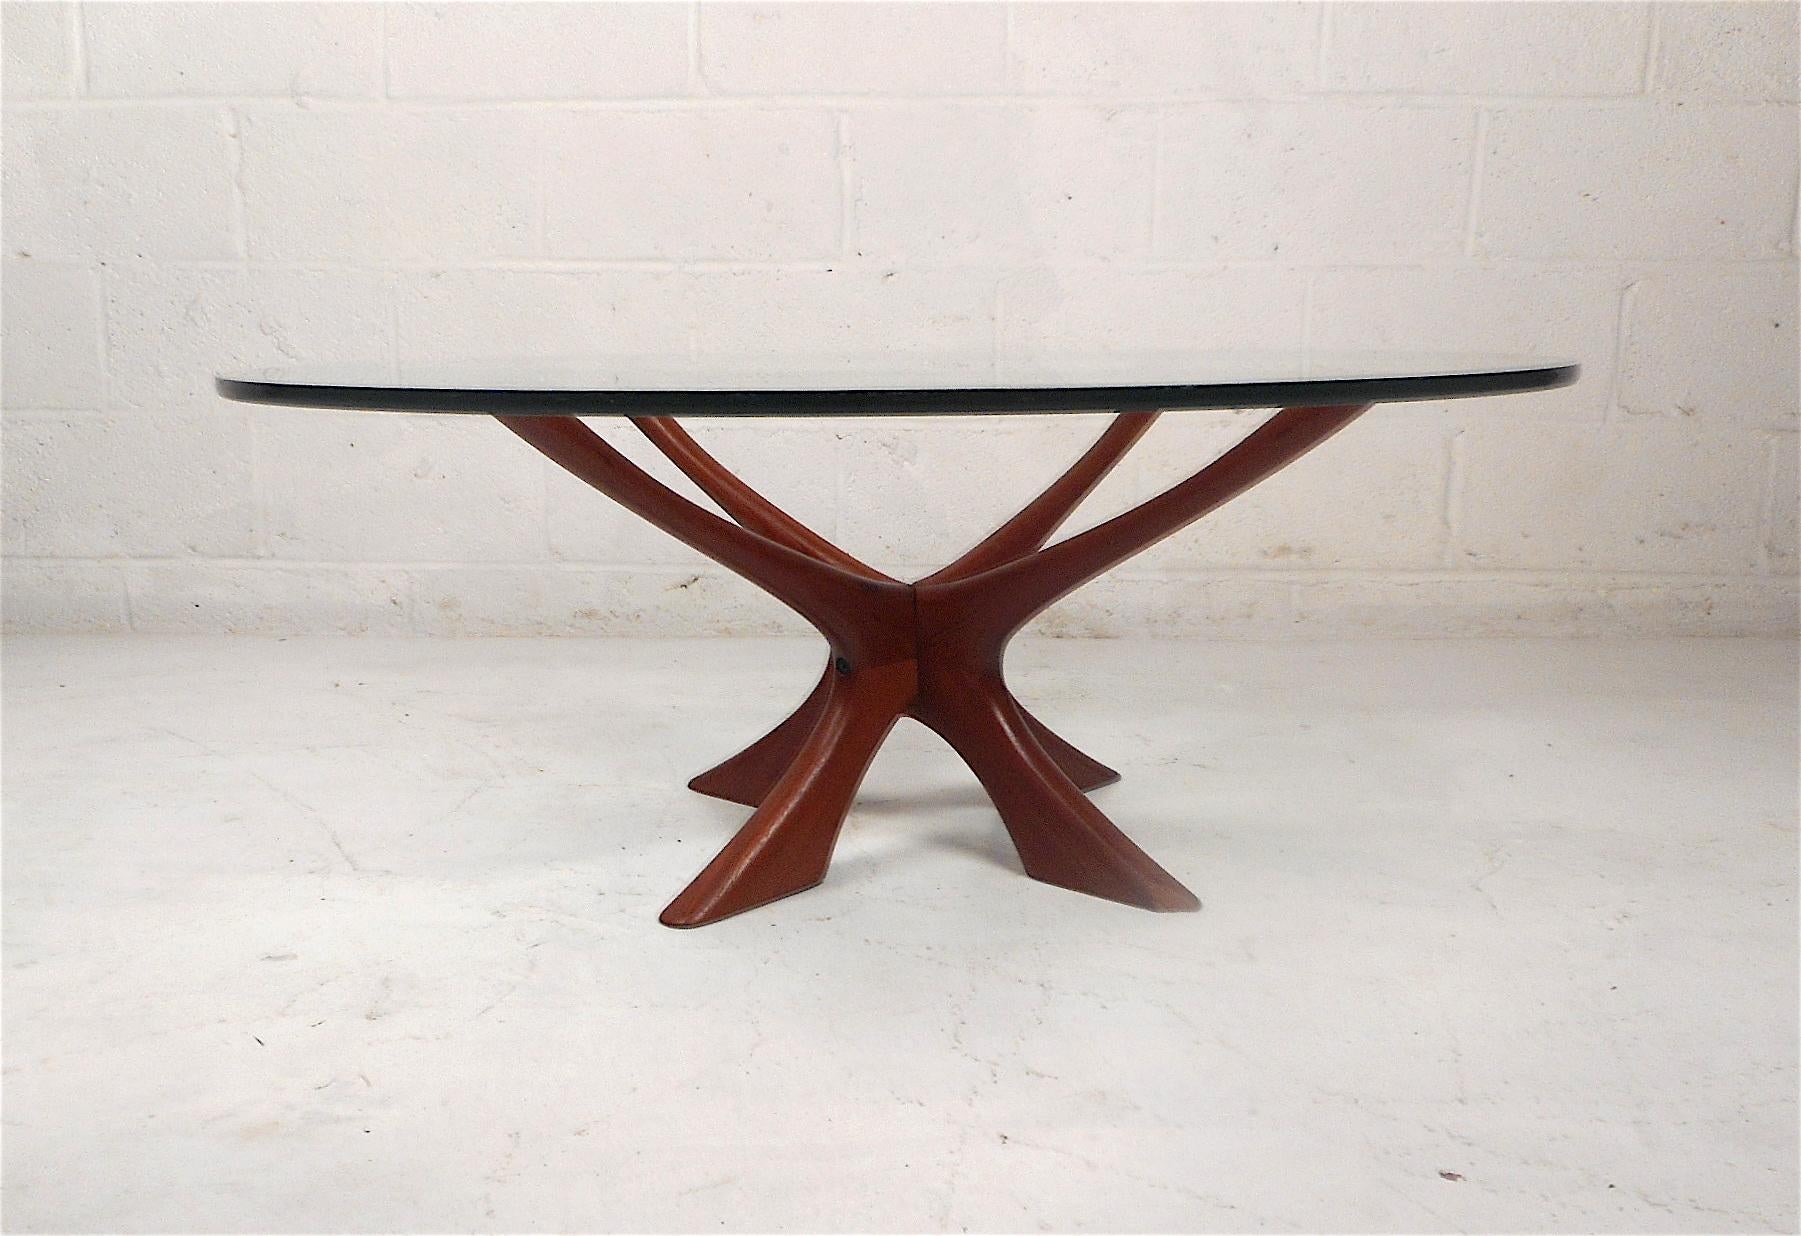 Stylish Danish modern glass top table with a sculptural teak base. Designed by Illum Wikkelso, circa 1950s. Glass top is 1/2 and inch thick. Great piece sure to make an impression in any modern interior. Please confirm item location with dealer (NJ